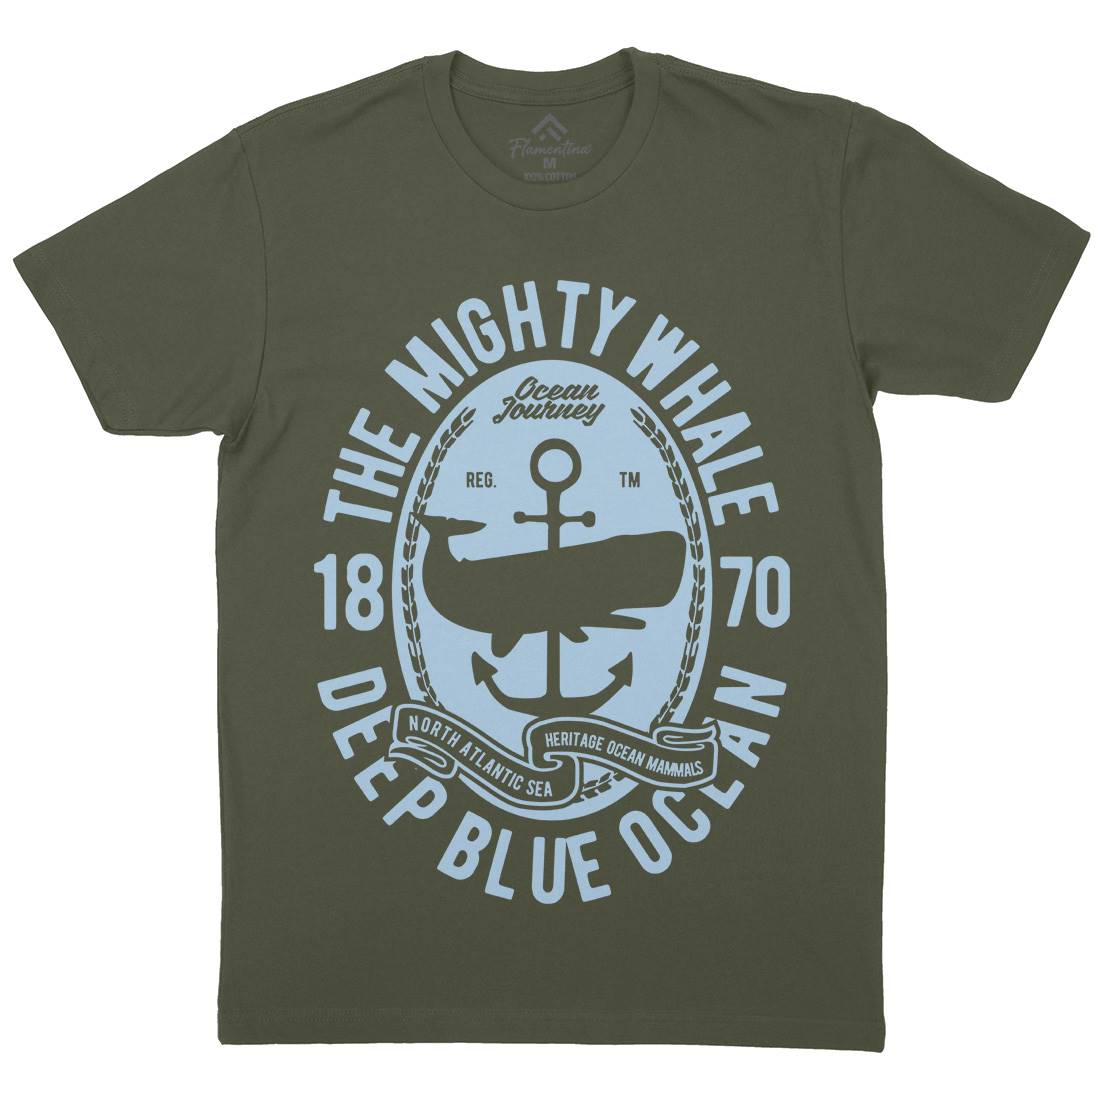 The Mighty Whale Mens Organic Crew Neck T-Shirt Navy B466